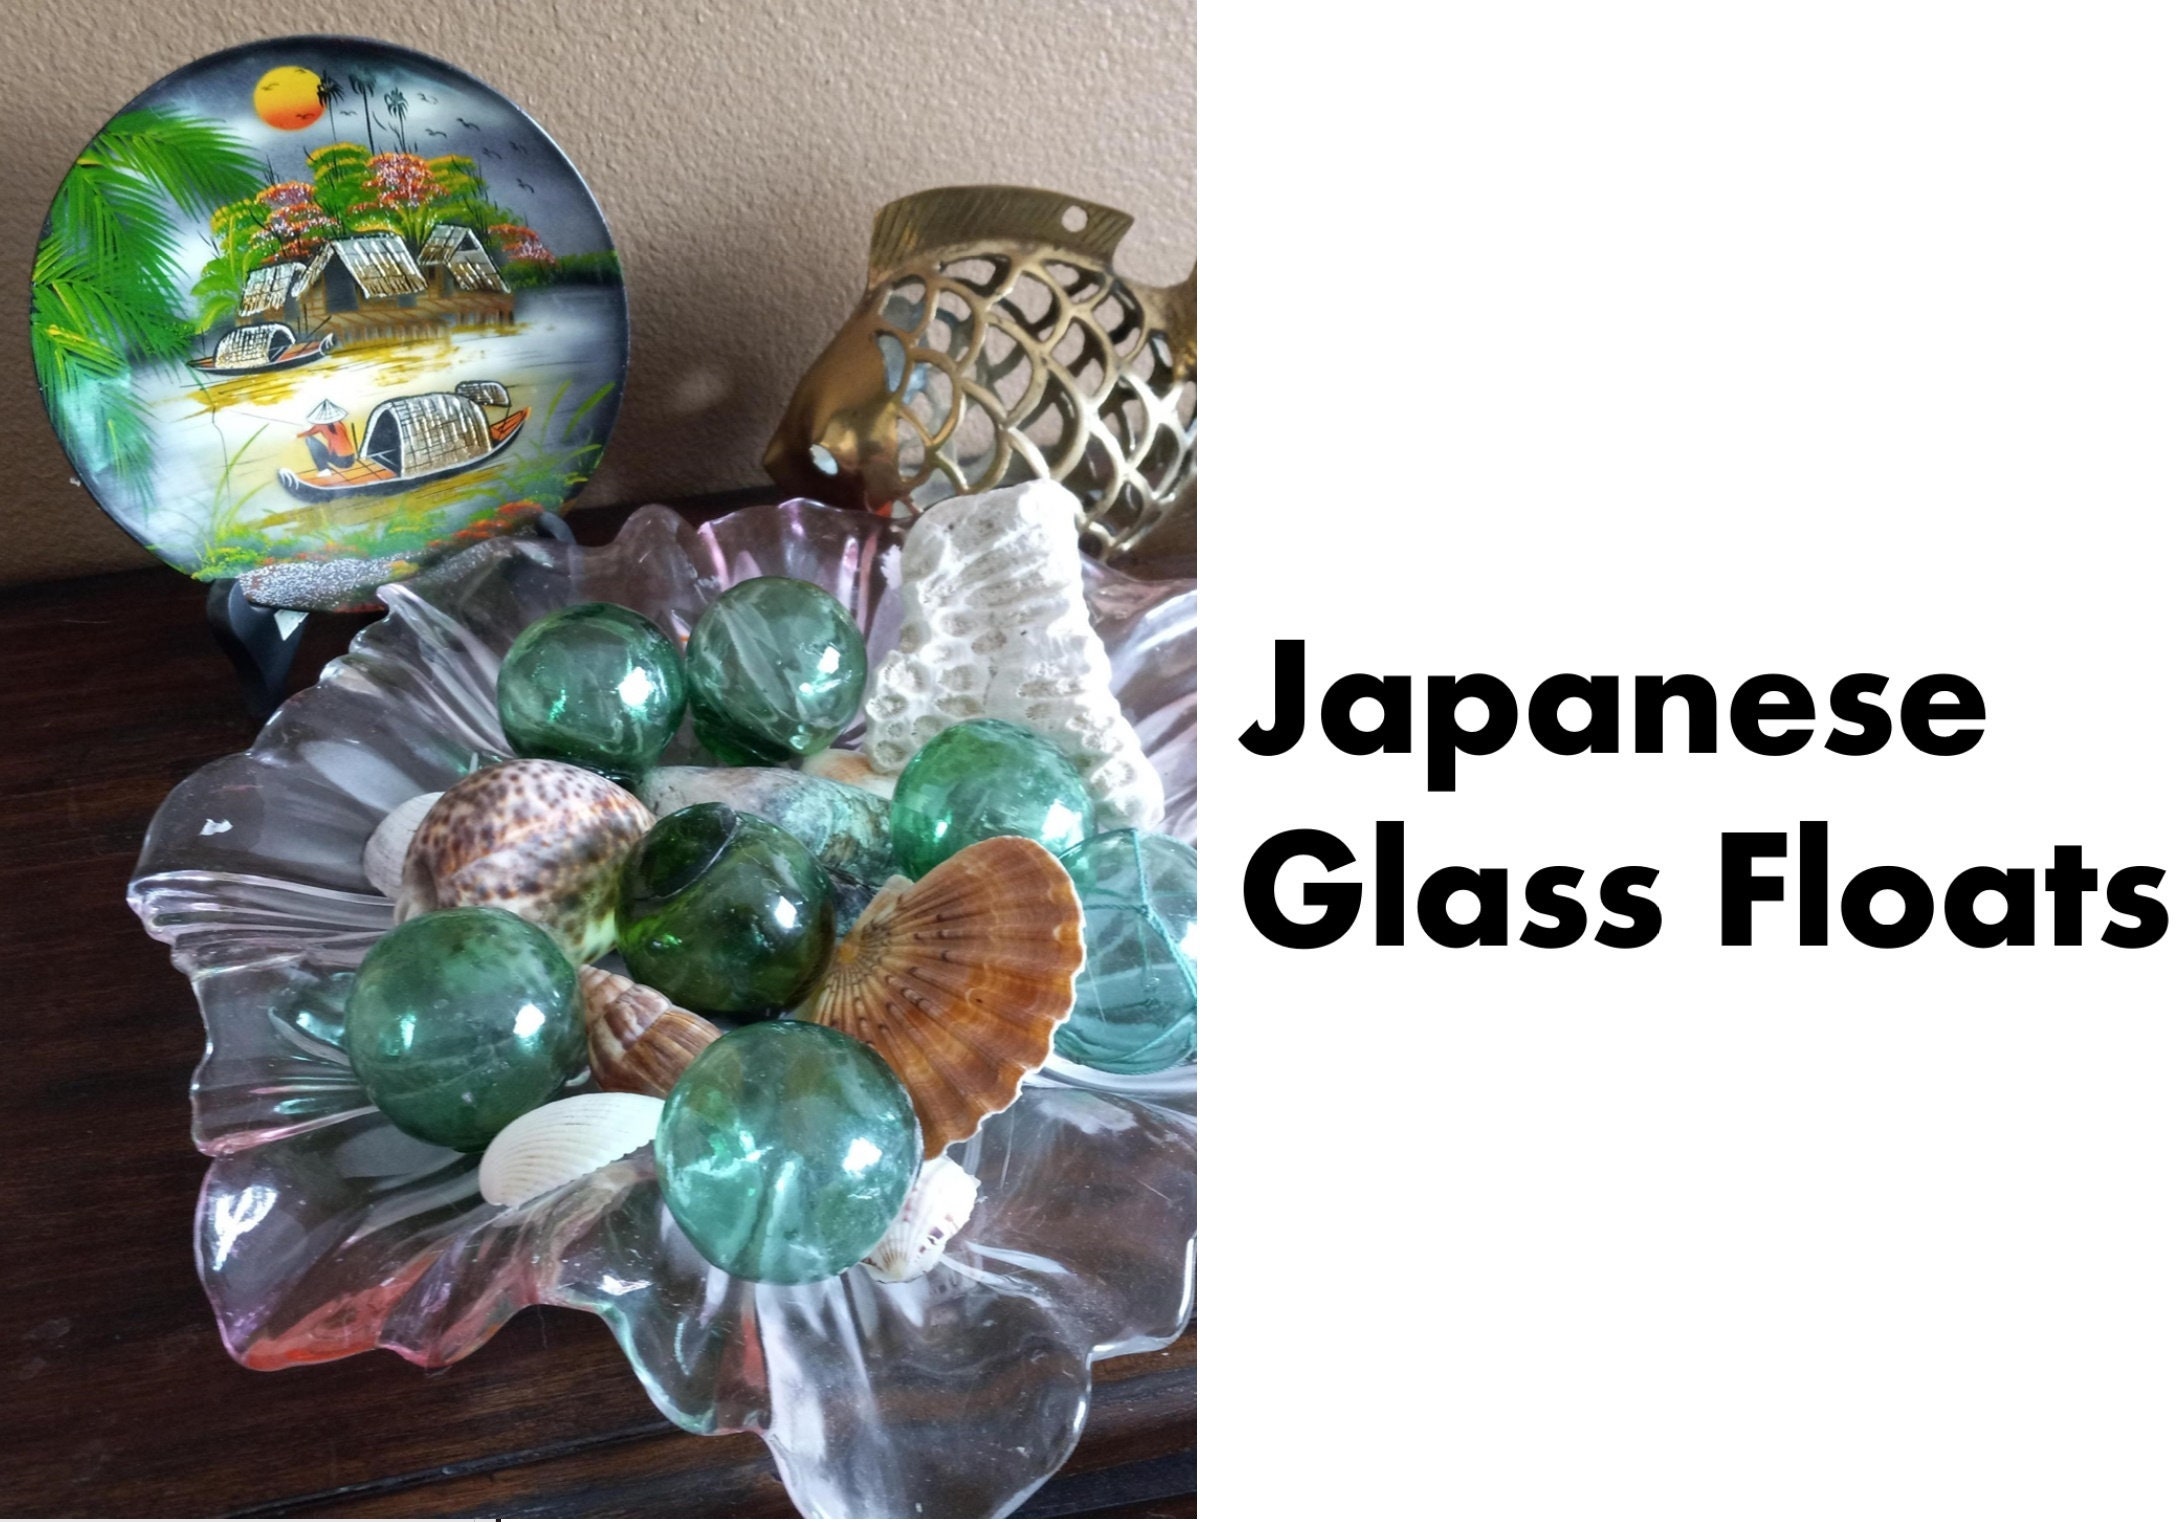 Old Vintage Japanese Glass fishing floats, Only 6.50 Each Star Seller &  FREE Shipping for 6 or more floats